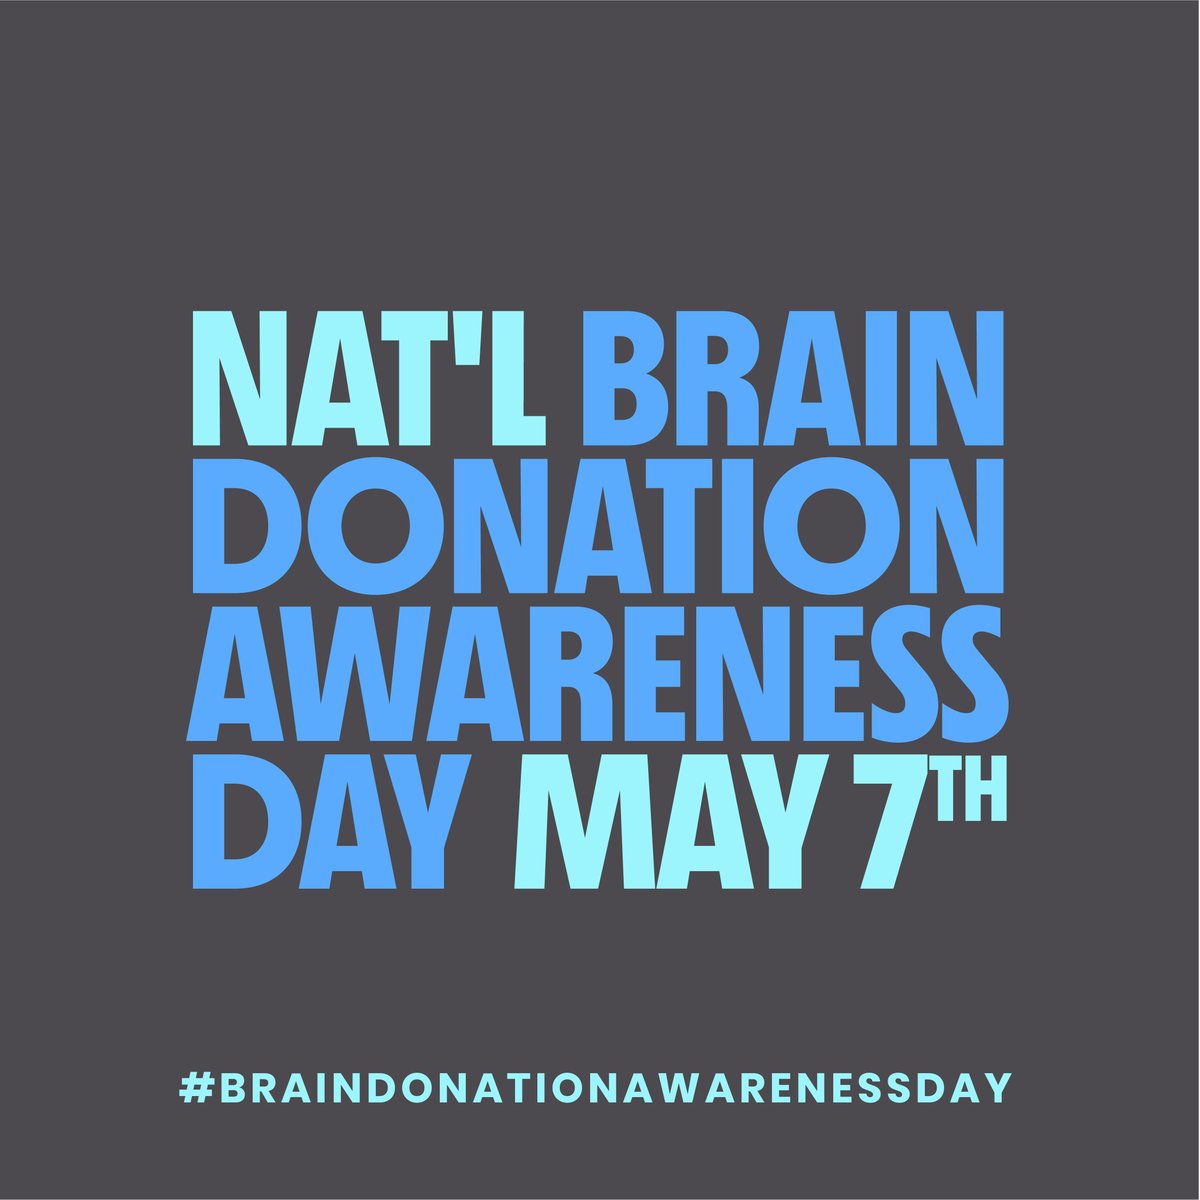 The chances of being diagnosed with a neurological disorder increase with age. Since we’re living longer than ever, researchers need human brain tissue for the next neuroscience breakthrough. Donating your brain is simple. Learn more at braindonorproject.org #bethebrain